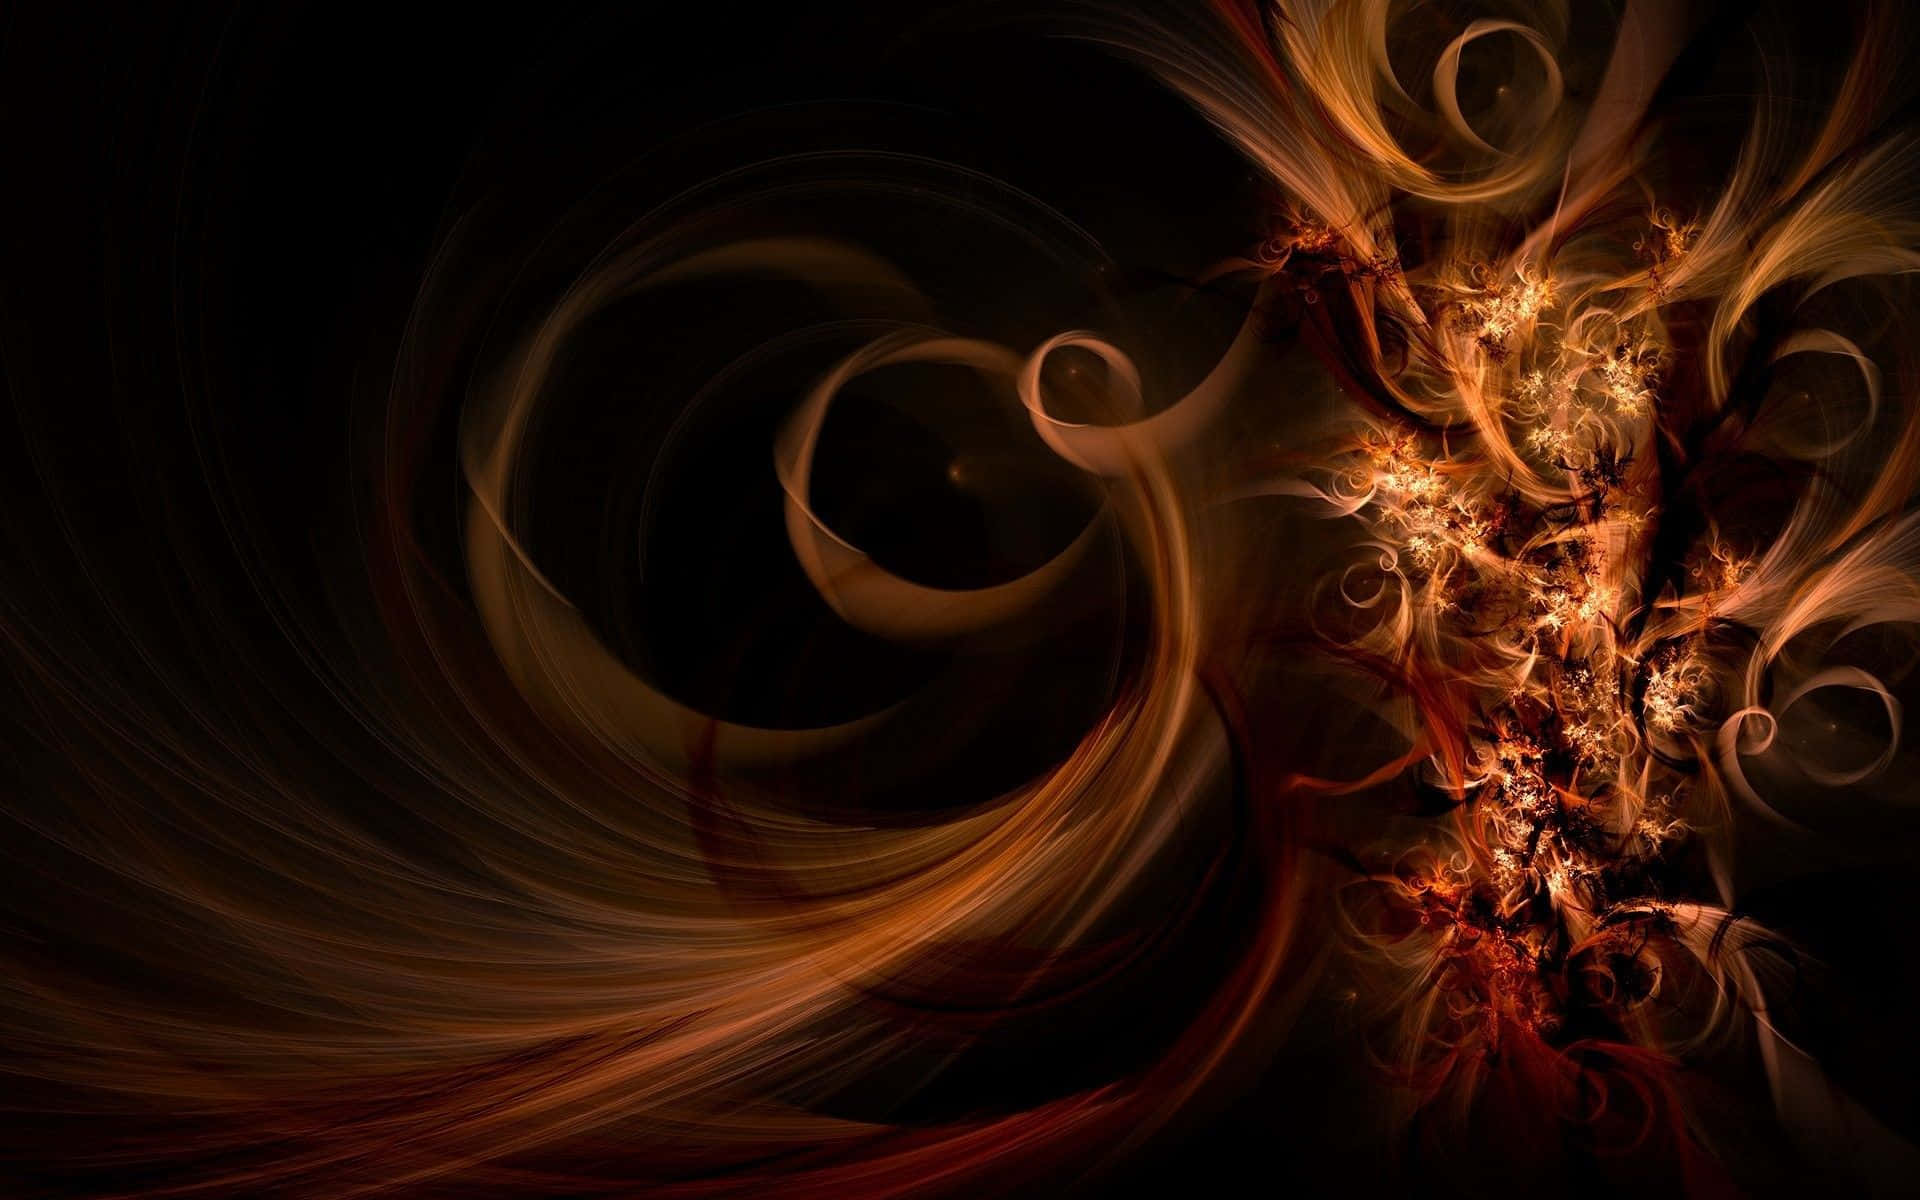 A Black Background With A Swirling Orange And Brown Design